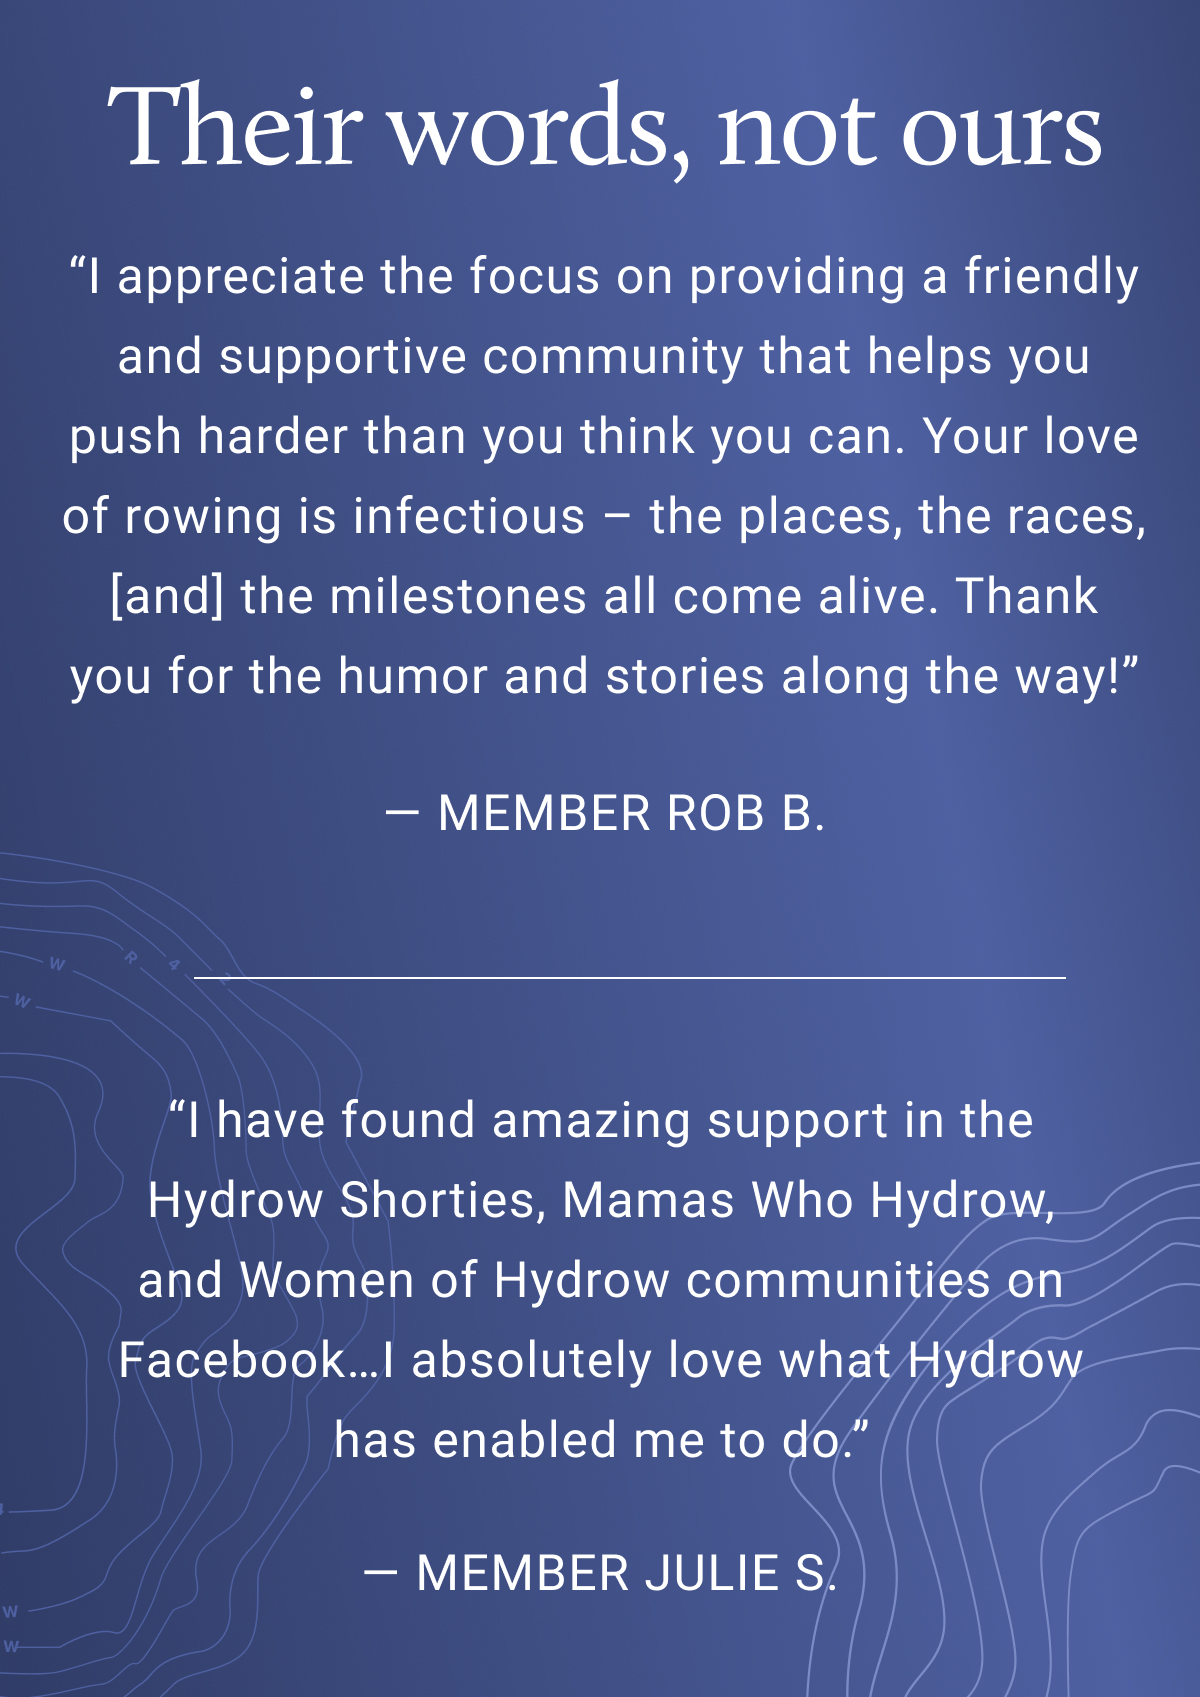 Their words, not ours. I appreciate the focus on providing a friendly and supportive community that helps you push harder than you think you can. Your love of rowing is infectious — the places, the races, [and] the milestones all come alive. Thank you for the humor and stories along the way! - Member Rob B. I have found amazing support in the Hydrow Shorties, Mamas who Hydrow, and Women of Hydrow communities on Facebook... I absolutely love what Hydrow has enabled me to do. - Member Julie S.